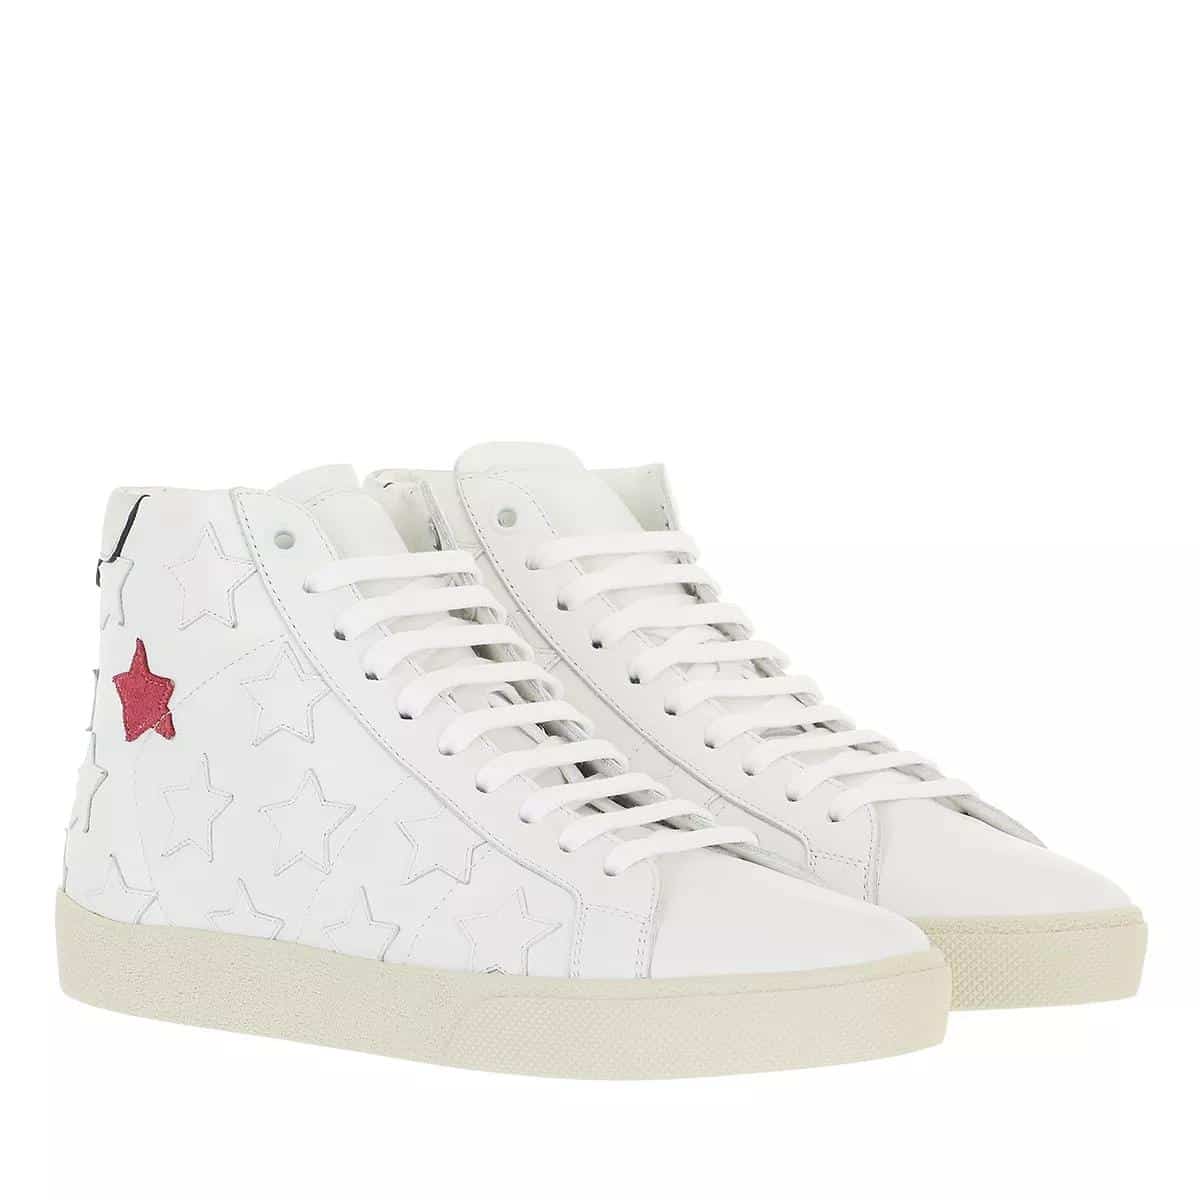 Saint Laurent Sneakers - Lace Up Tennis Sneakers in wit